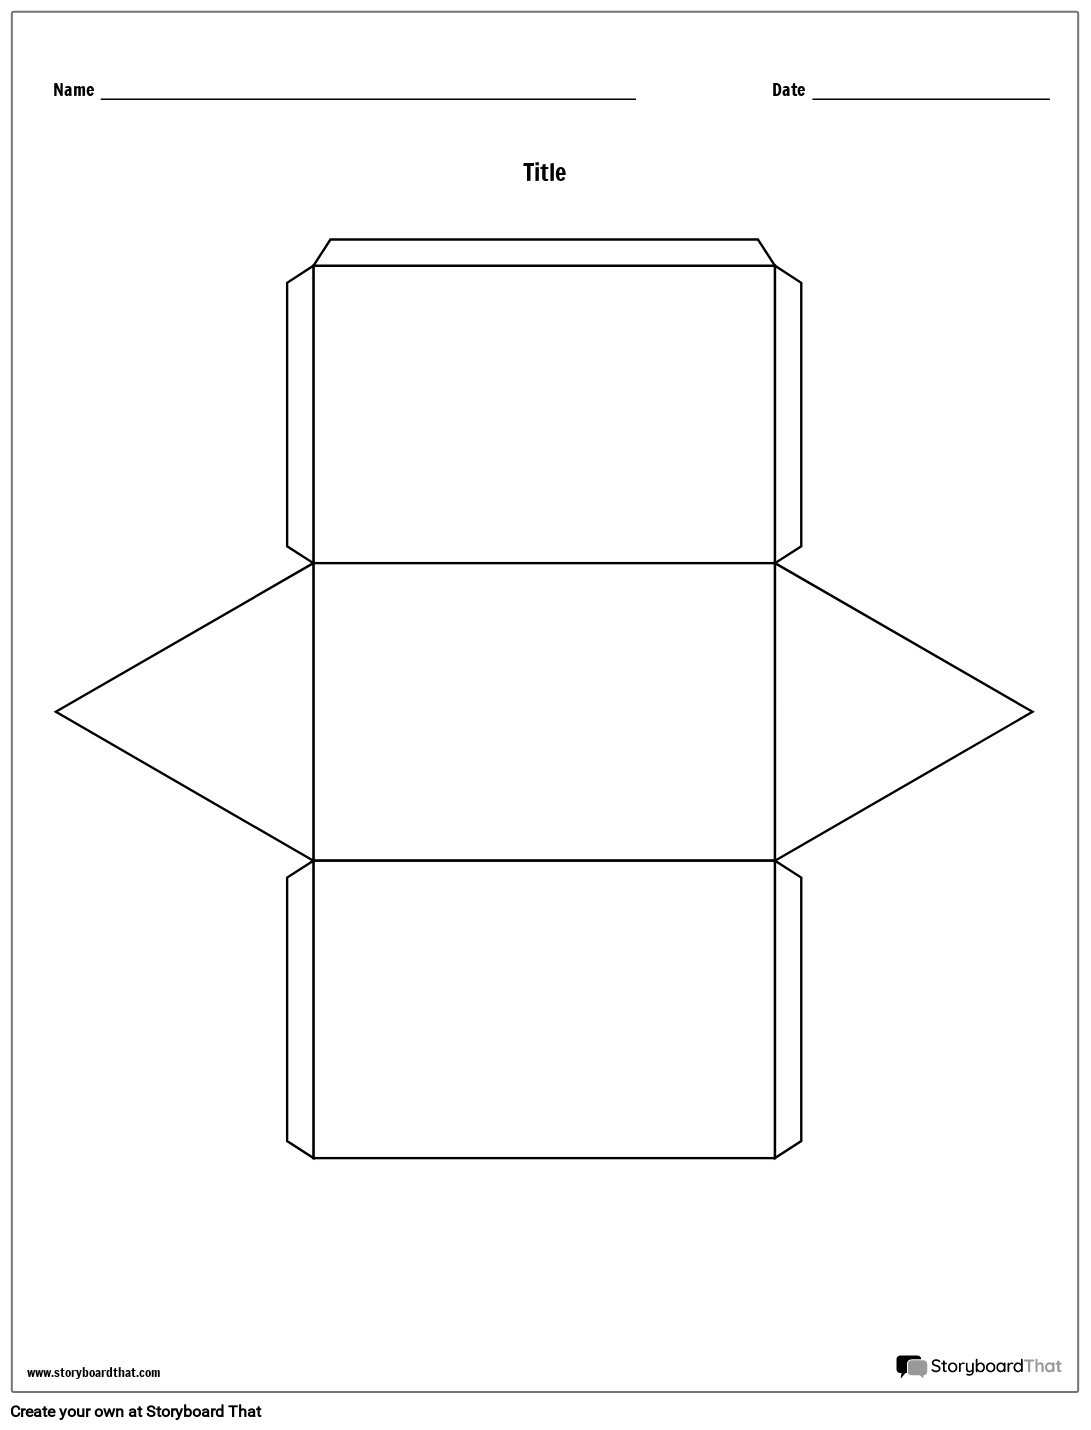 triangular-story-cube-storyboard-by-worksheet-templates